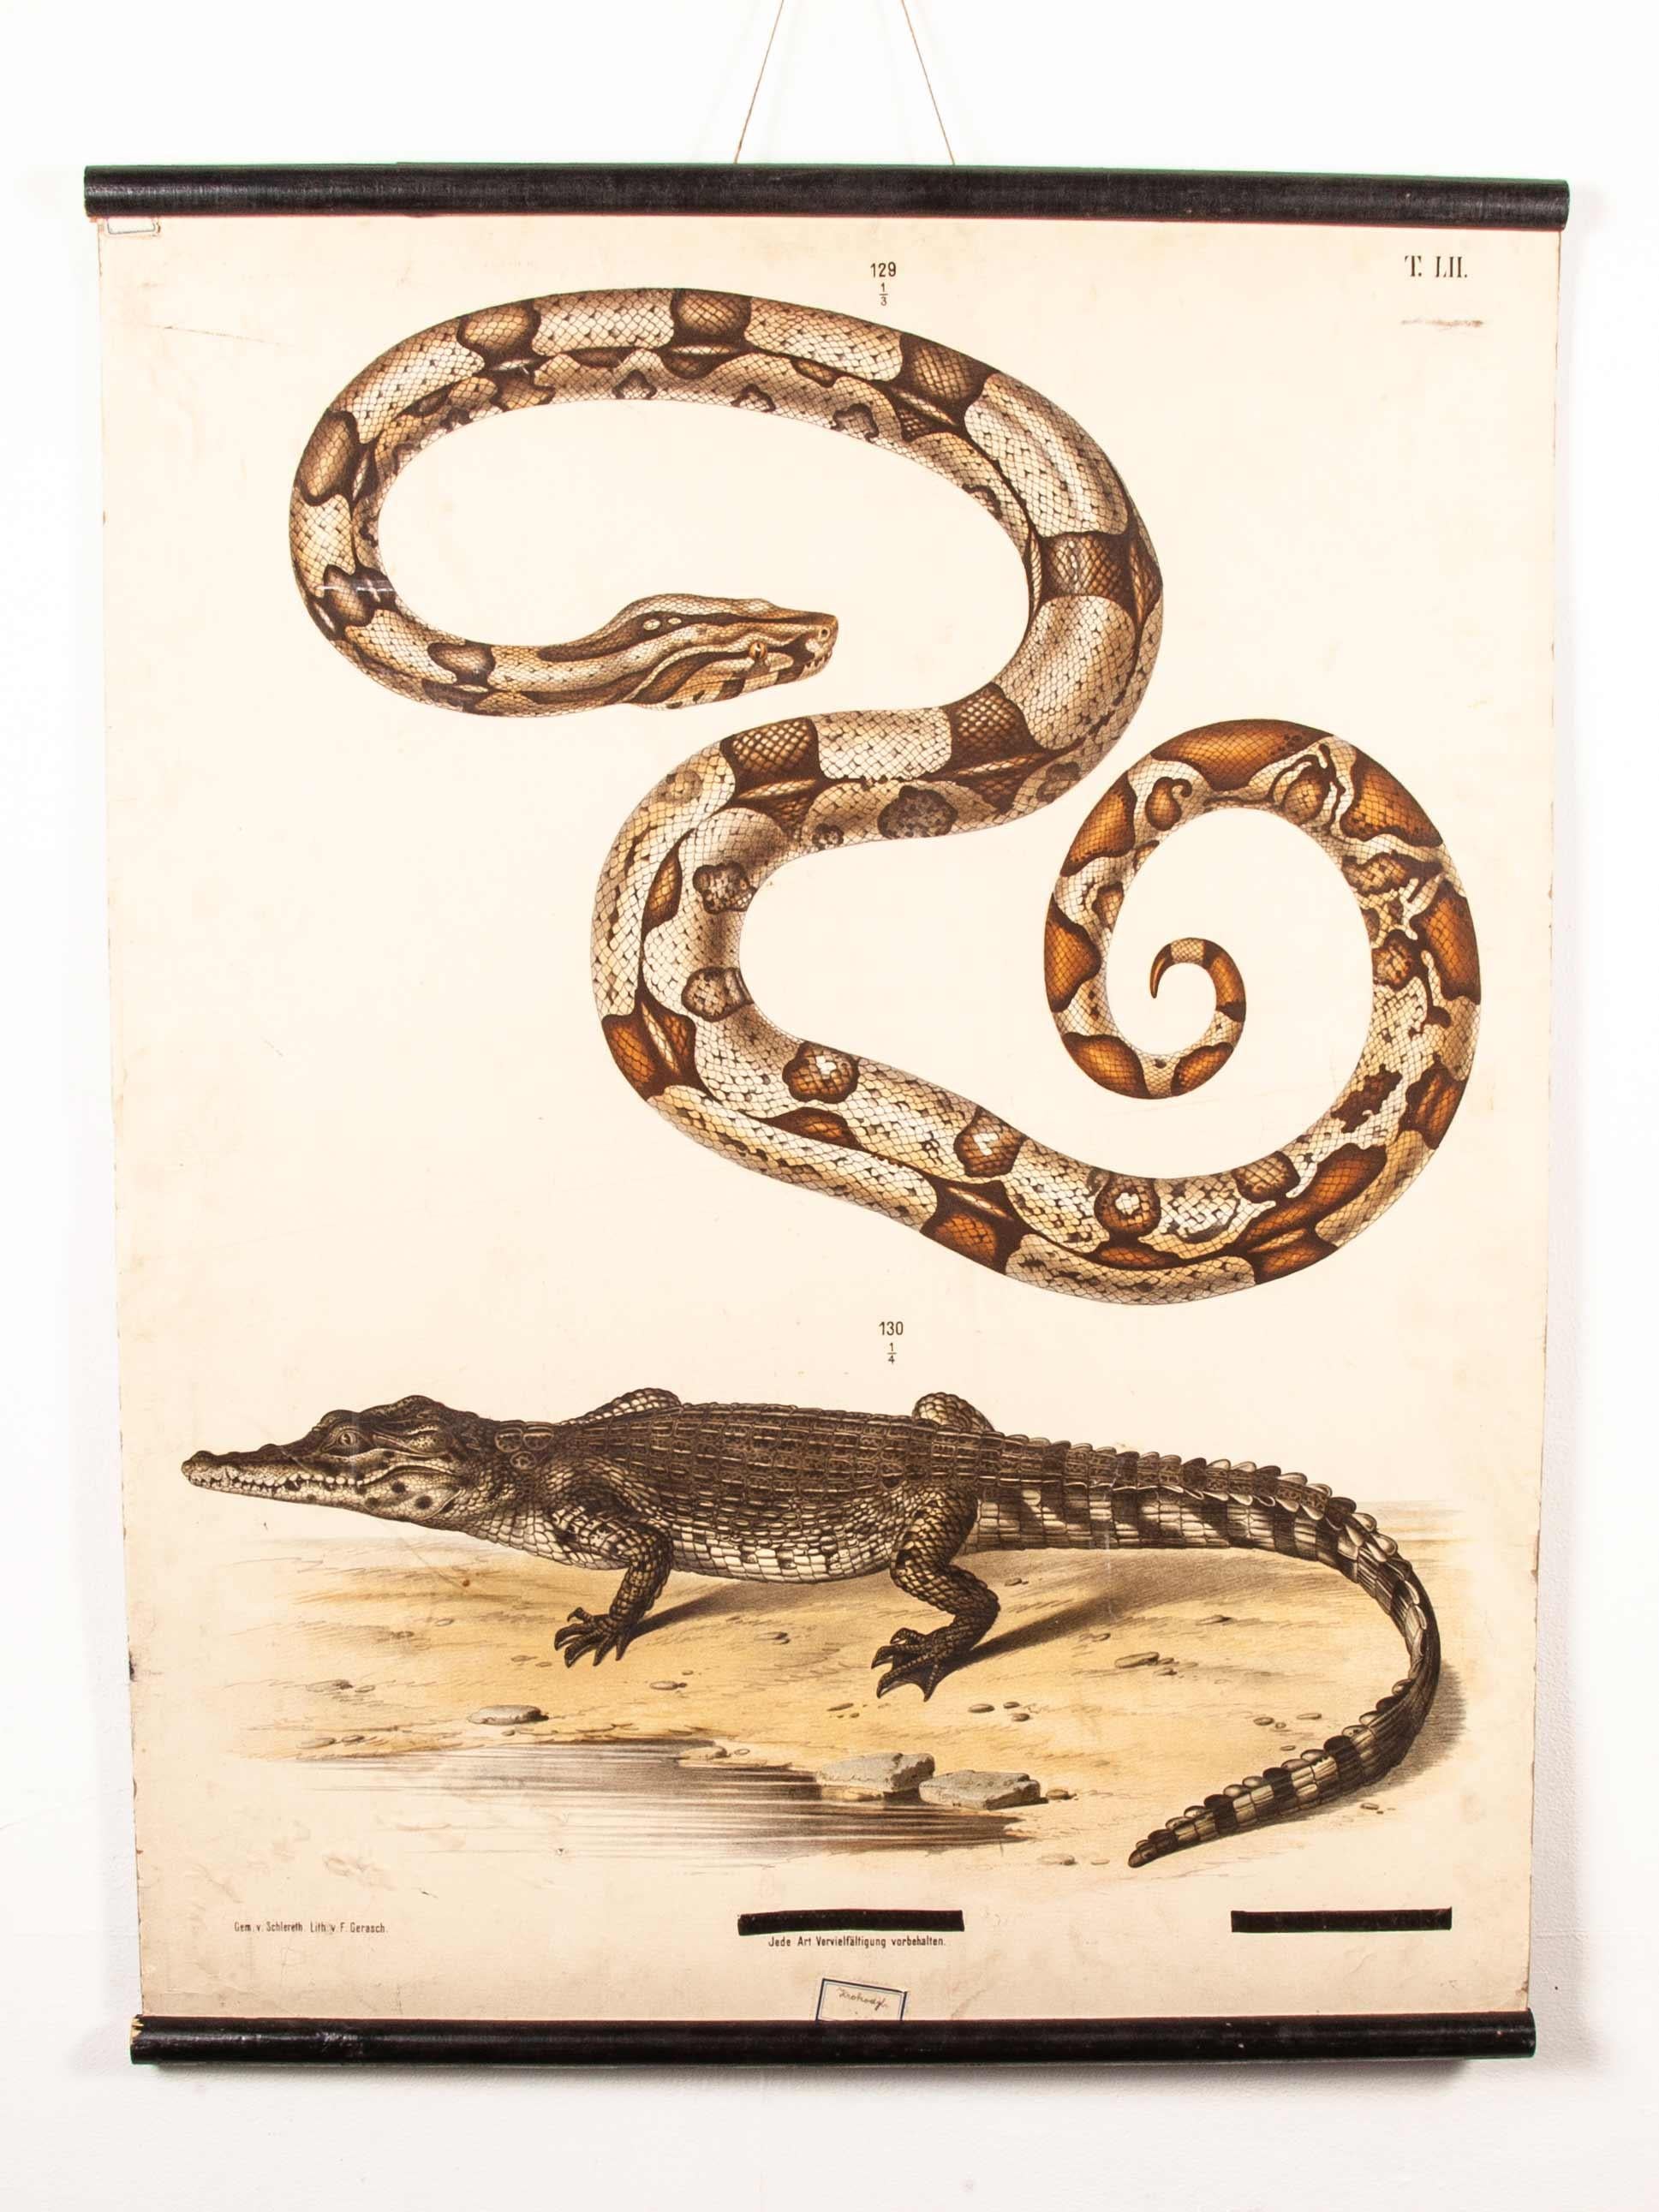 19th century educational German chart – snake and crocodile. 19th century exceptional educational teaching chart from the Czech Republic, it is an early lithograph displayed hanging on original split wooden battens. In excellent condition for its